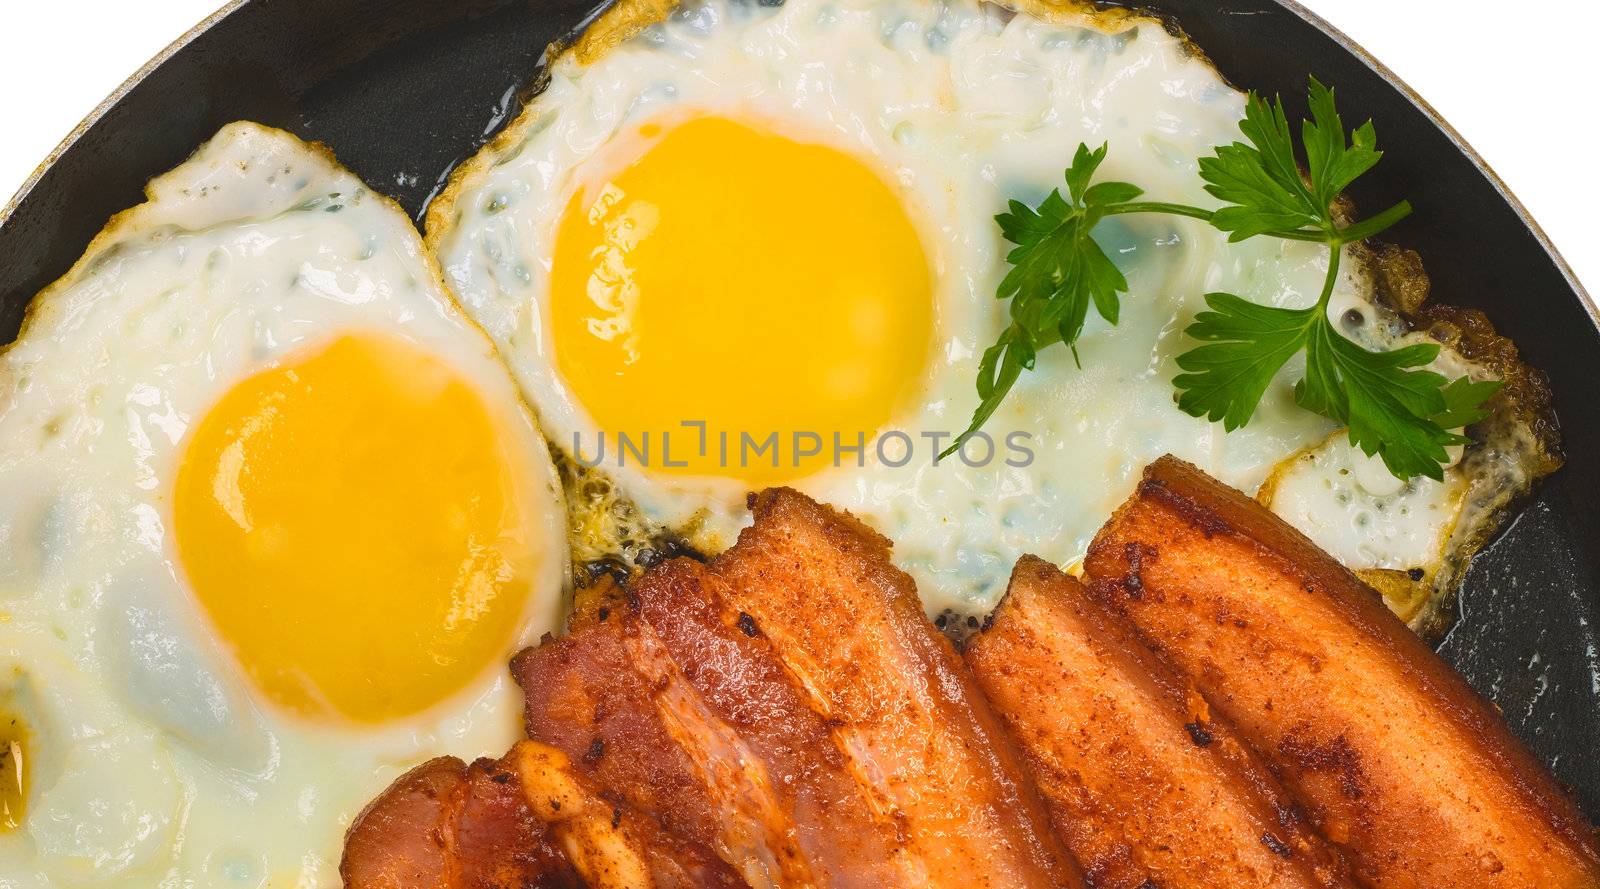 fried egg with bacon